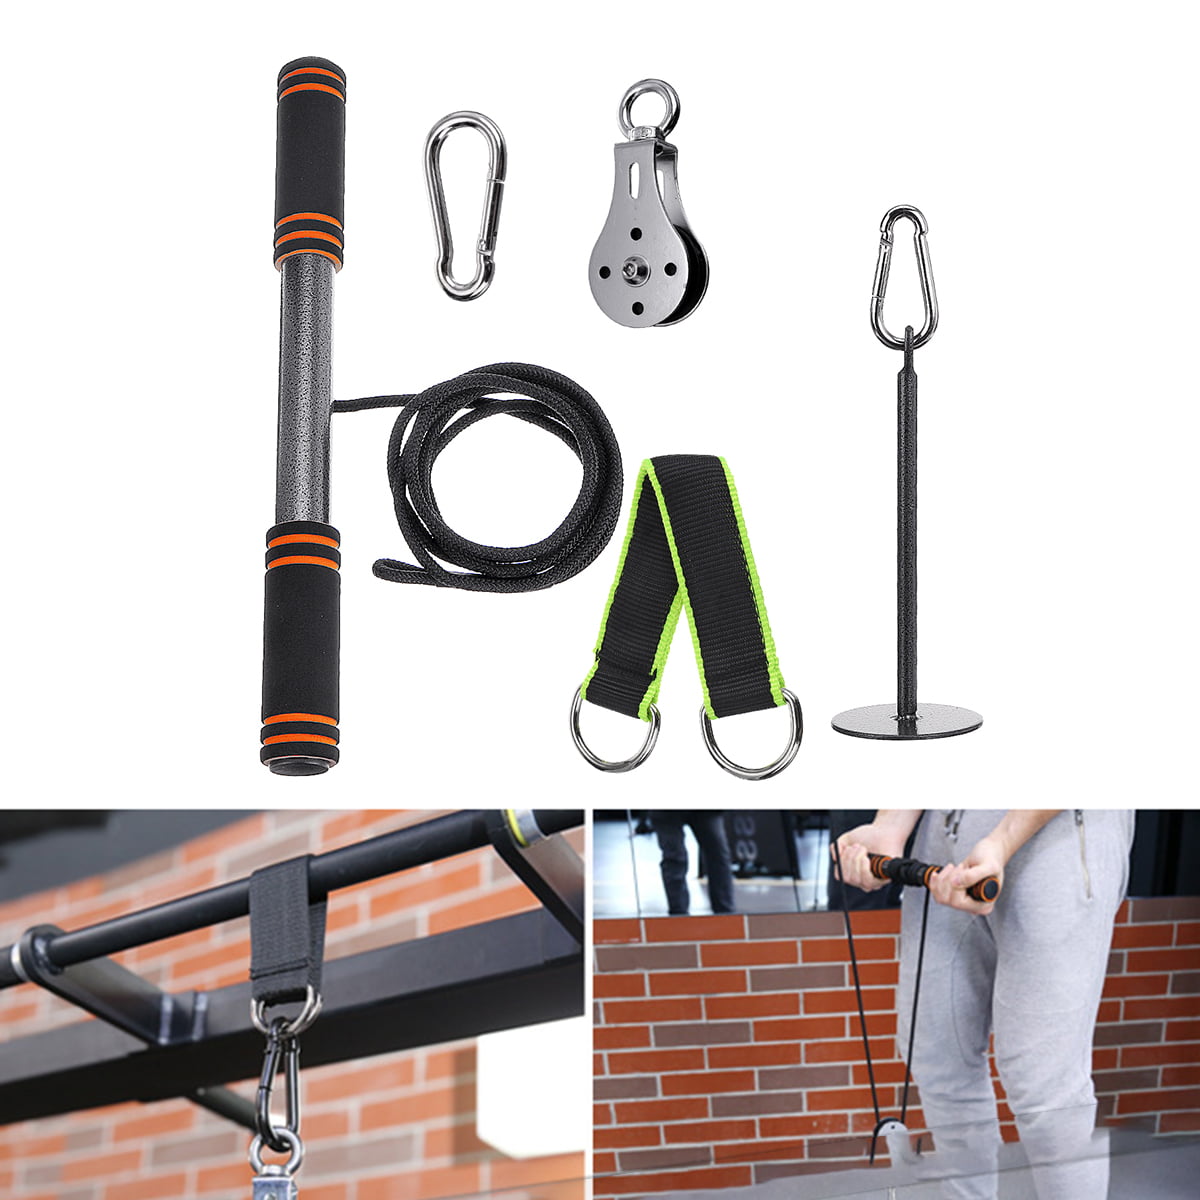 DIY Fitness Pulley Cable Gym Workout Equipment Machine Attachment System Home - Walmart.com ...